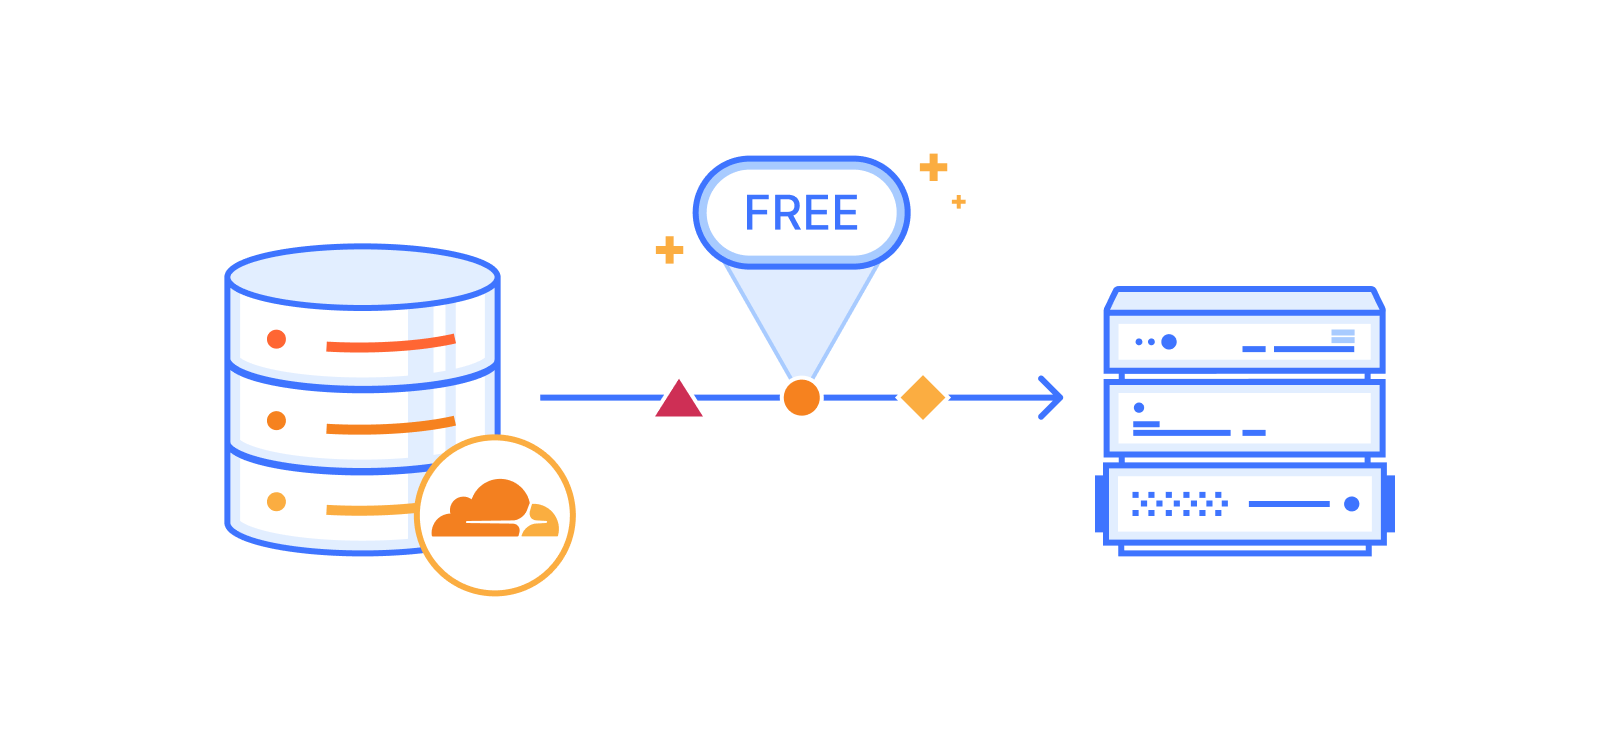 Sippy helps you avoid egress fees while incrementally migrating data from S3 to R2